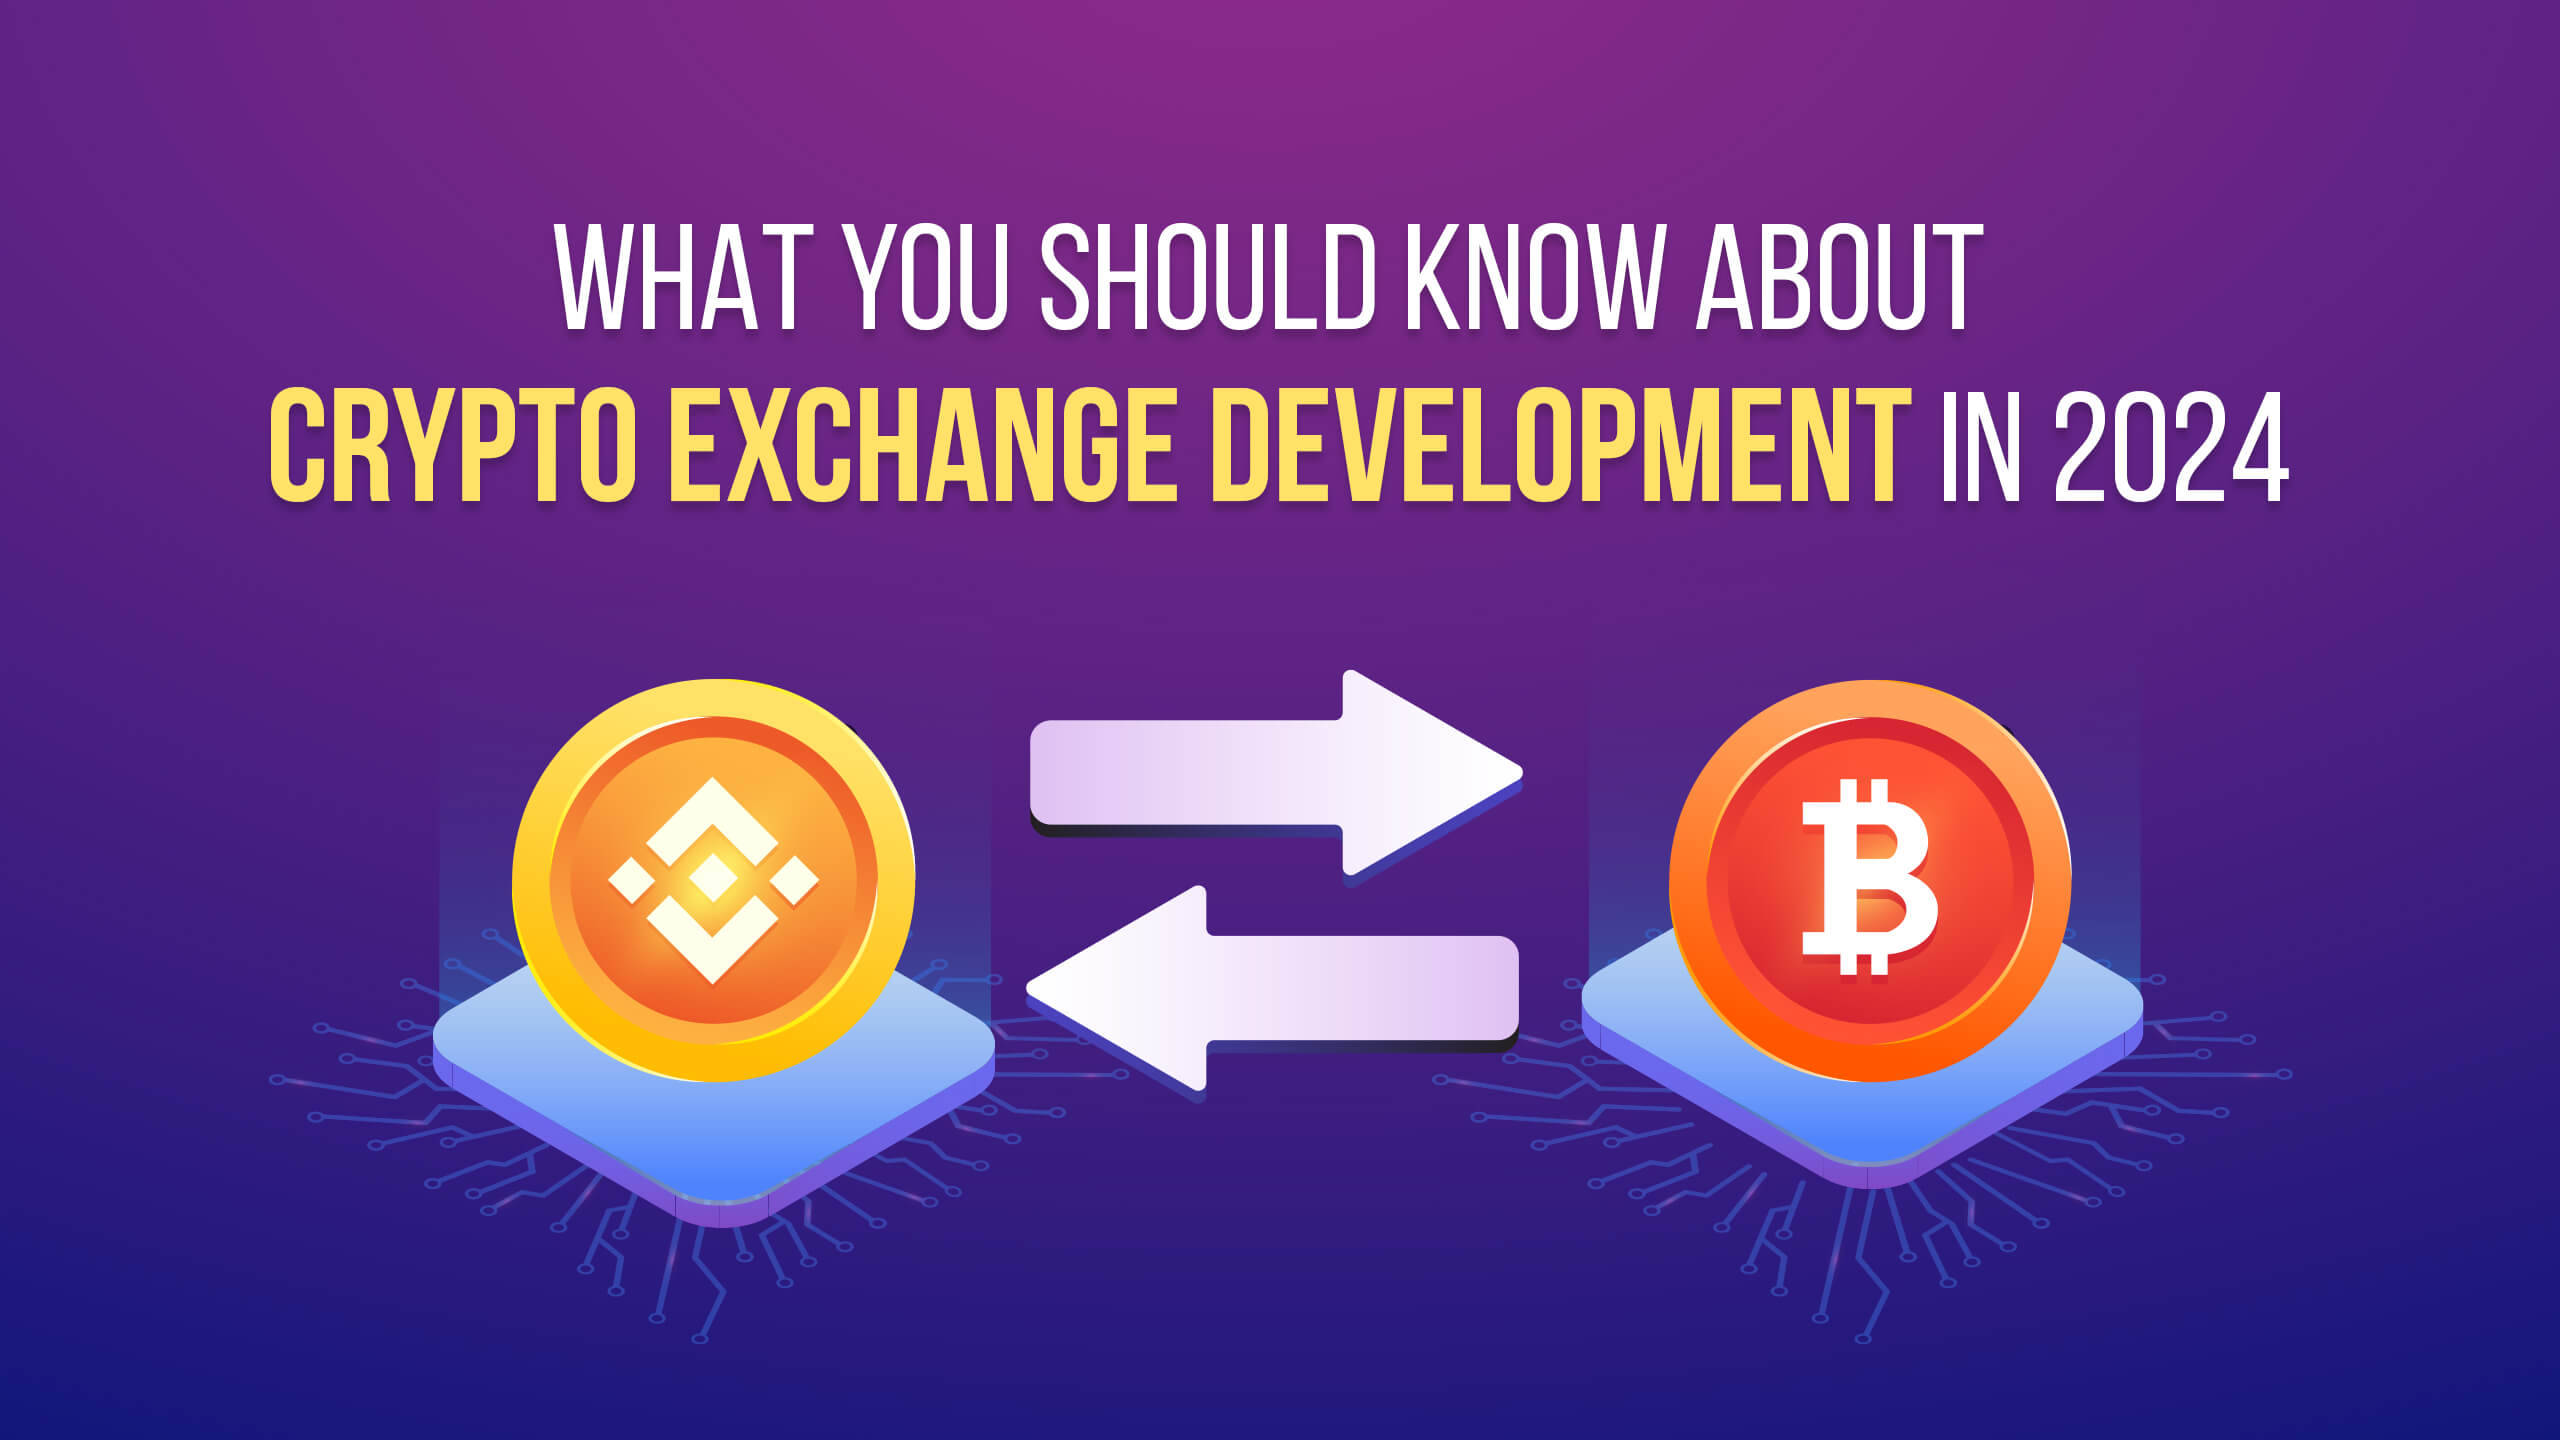 Know About Crypto Exchange Development in 2024